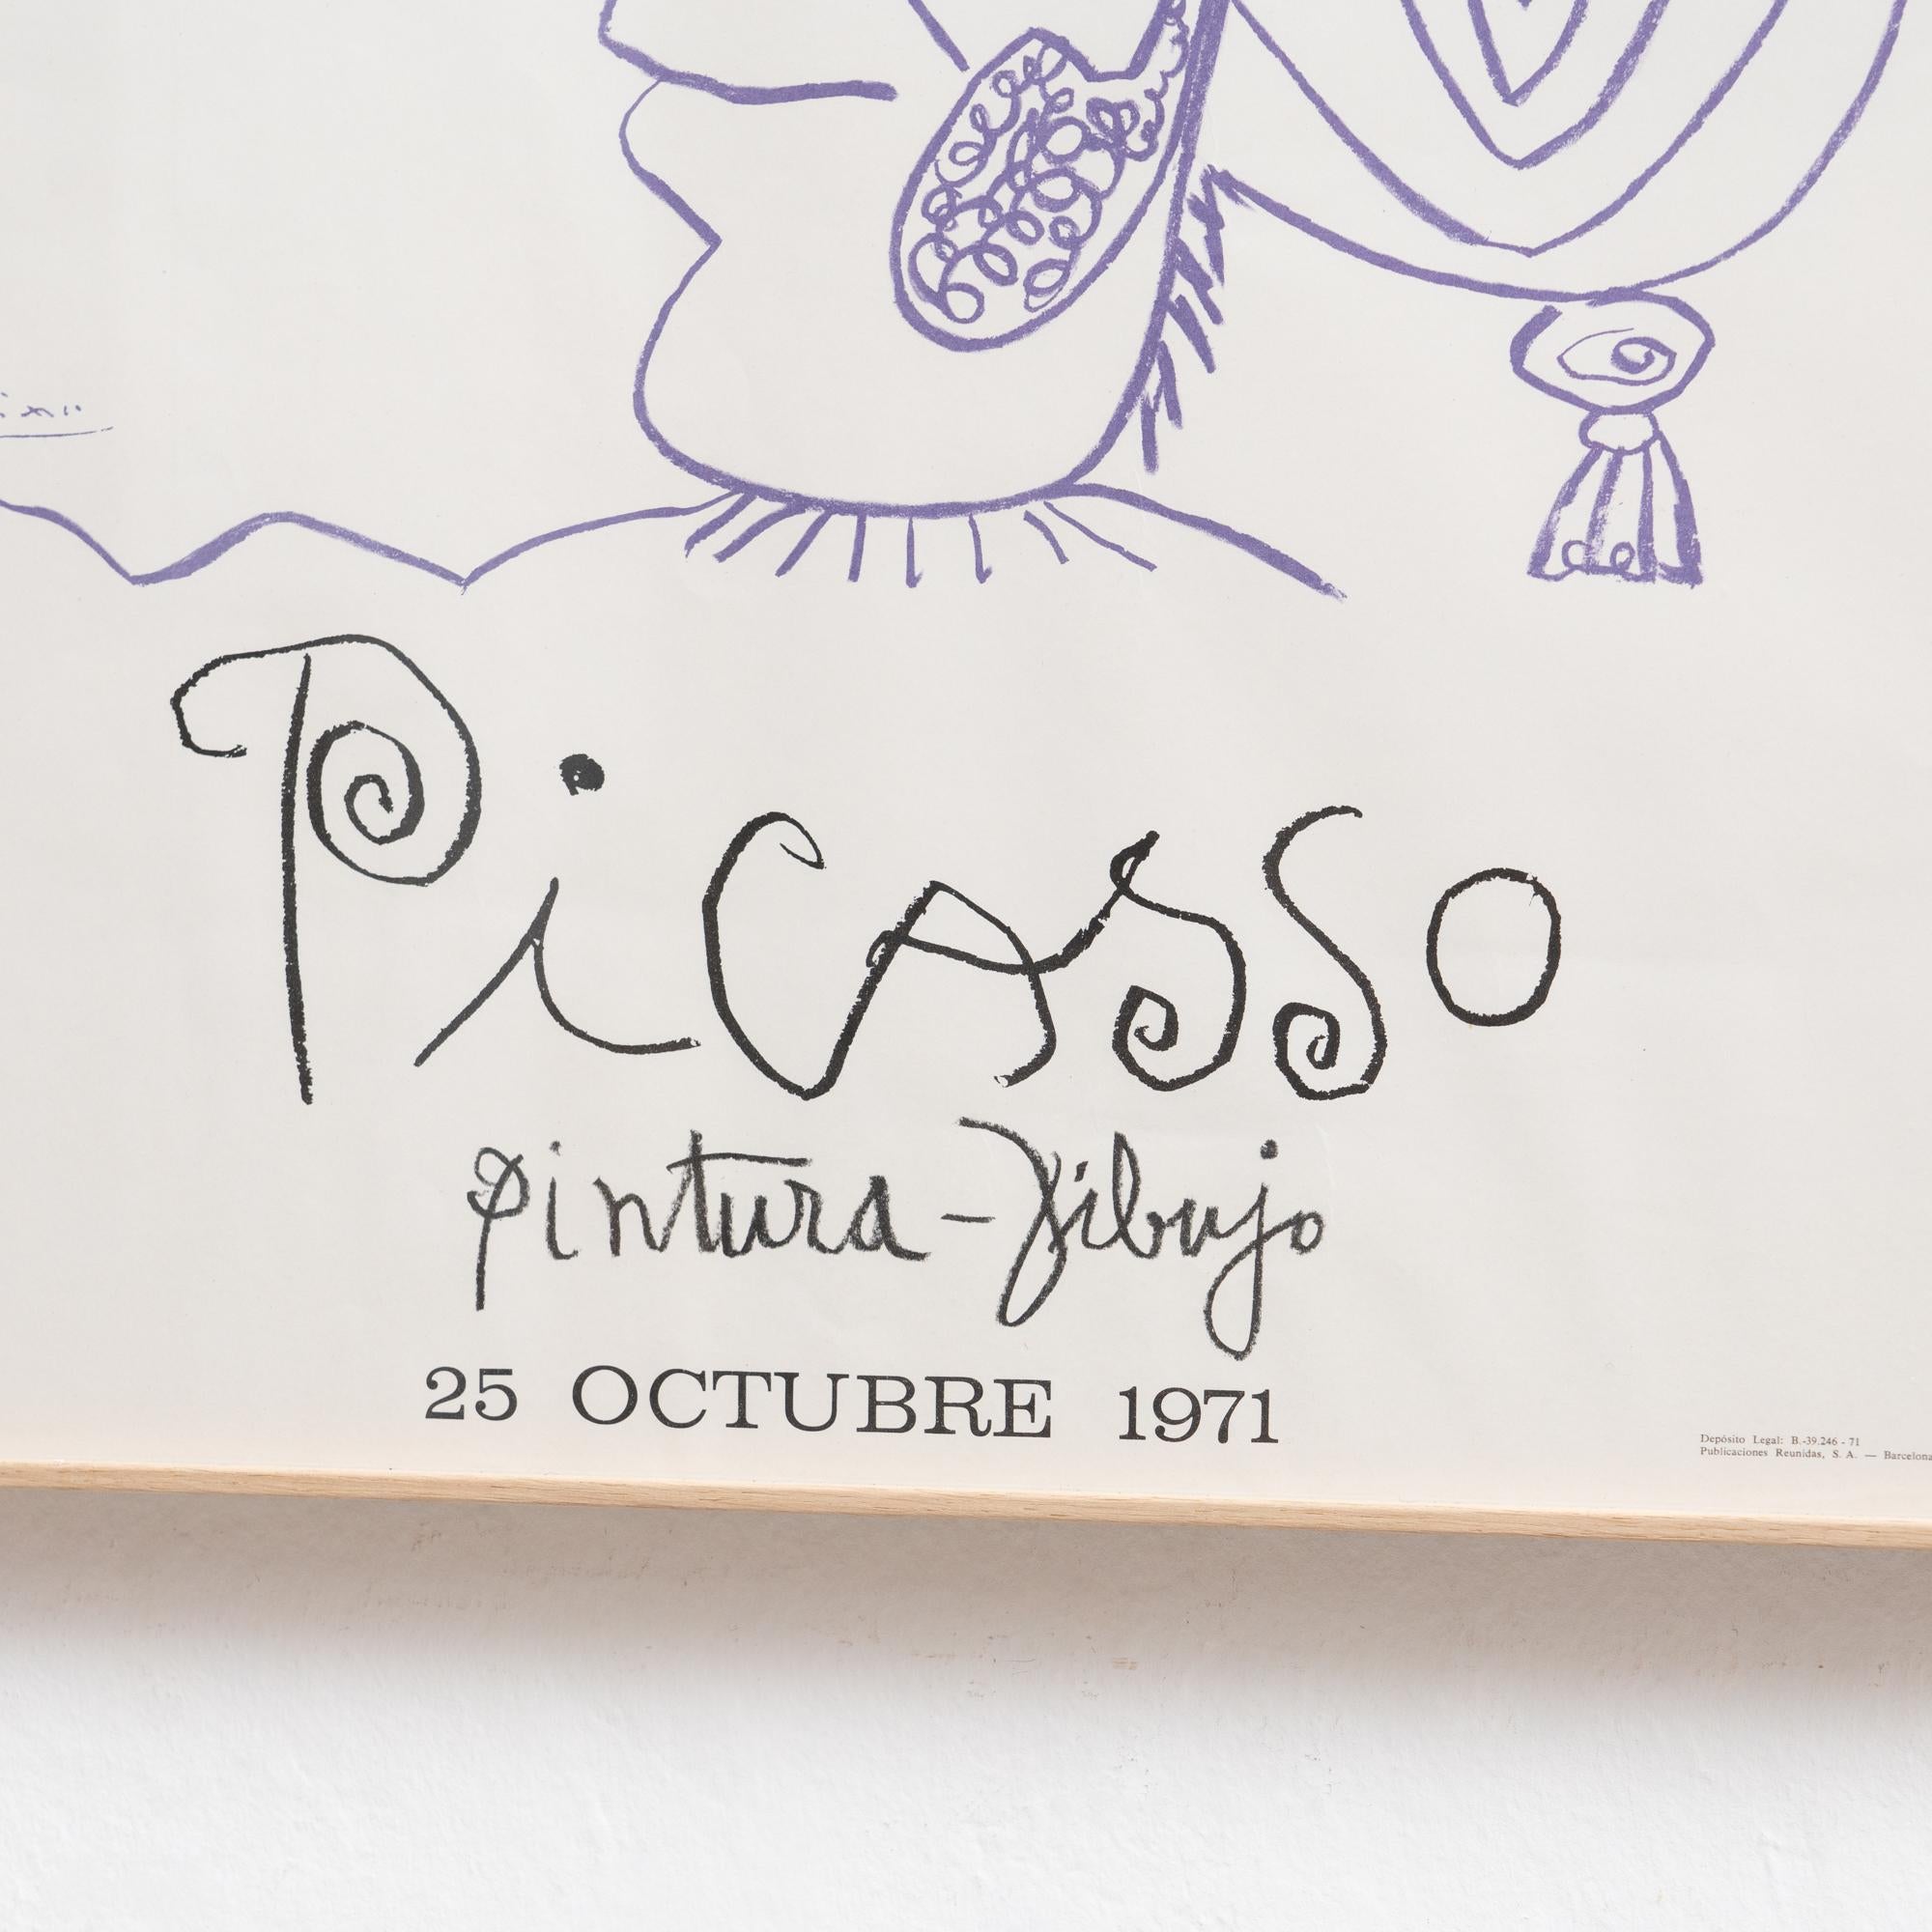 Spanish Pablo Picasso Vintage Exhibition Poster, 1971 For Sale